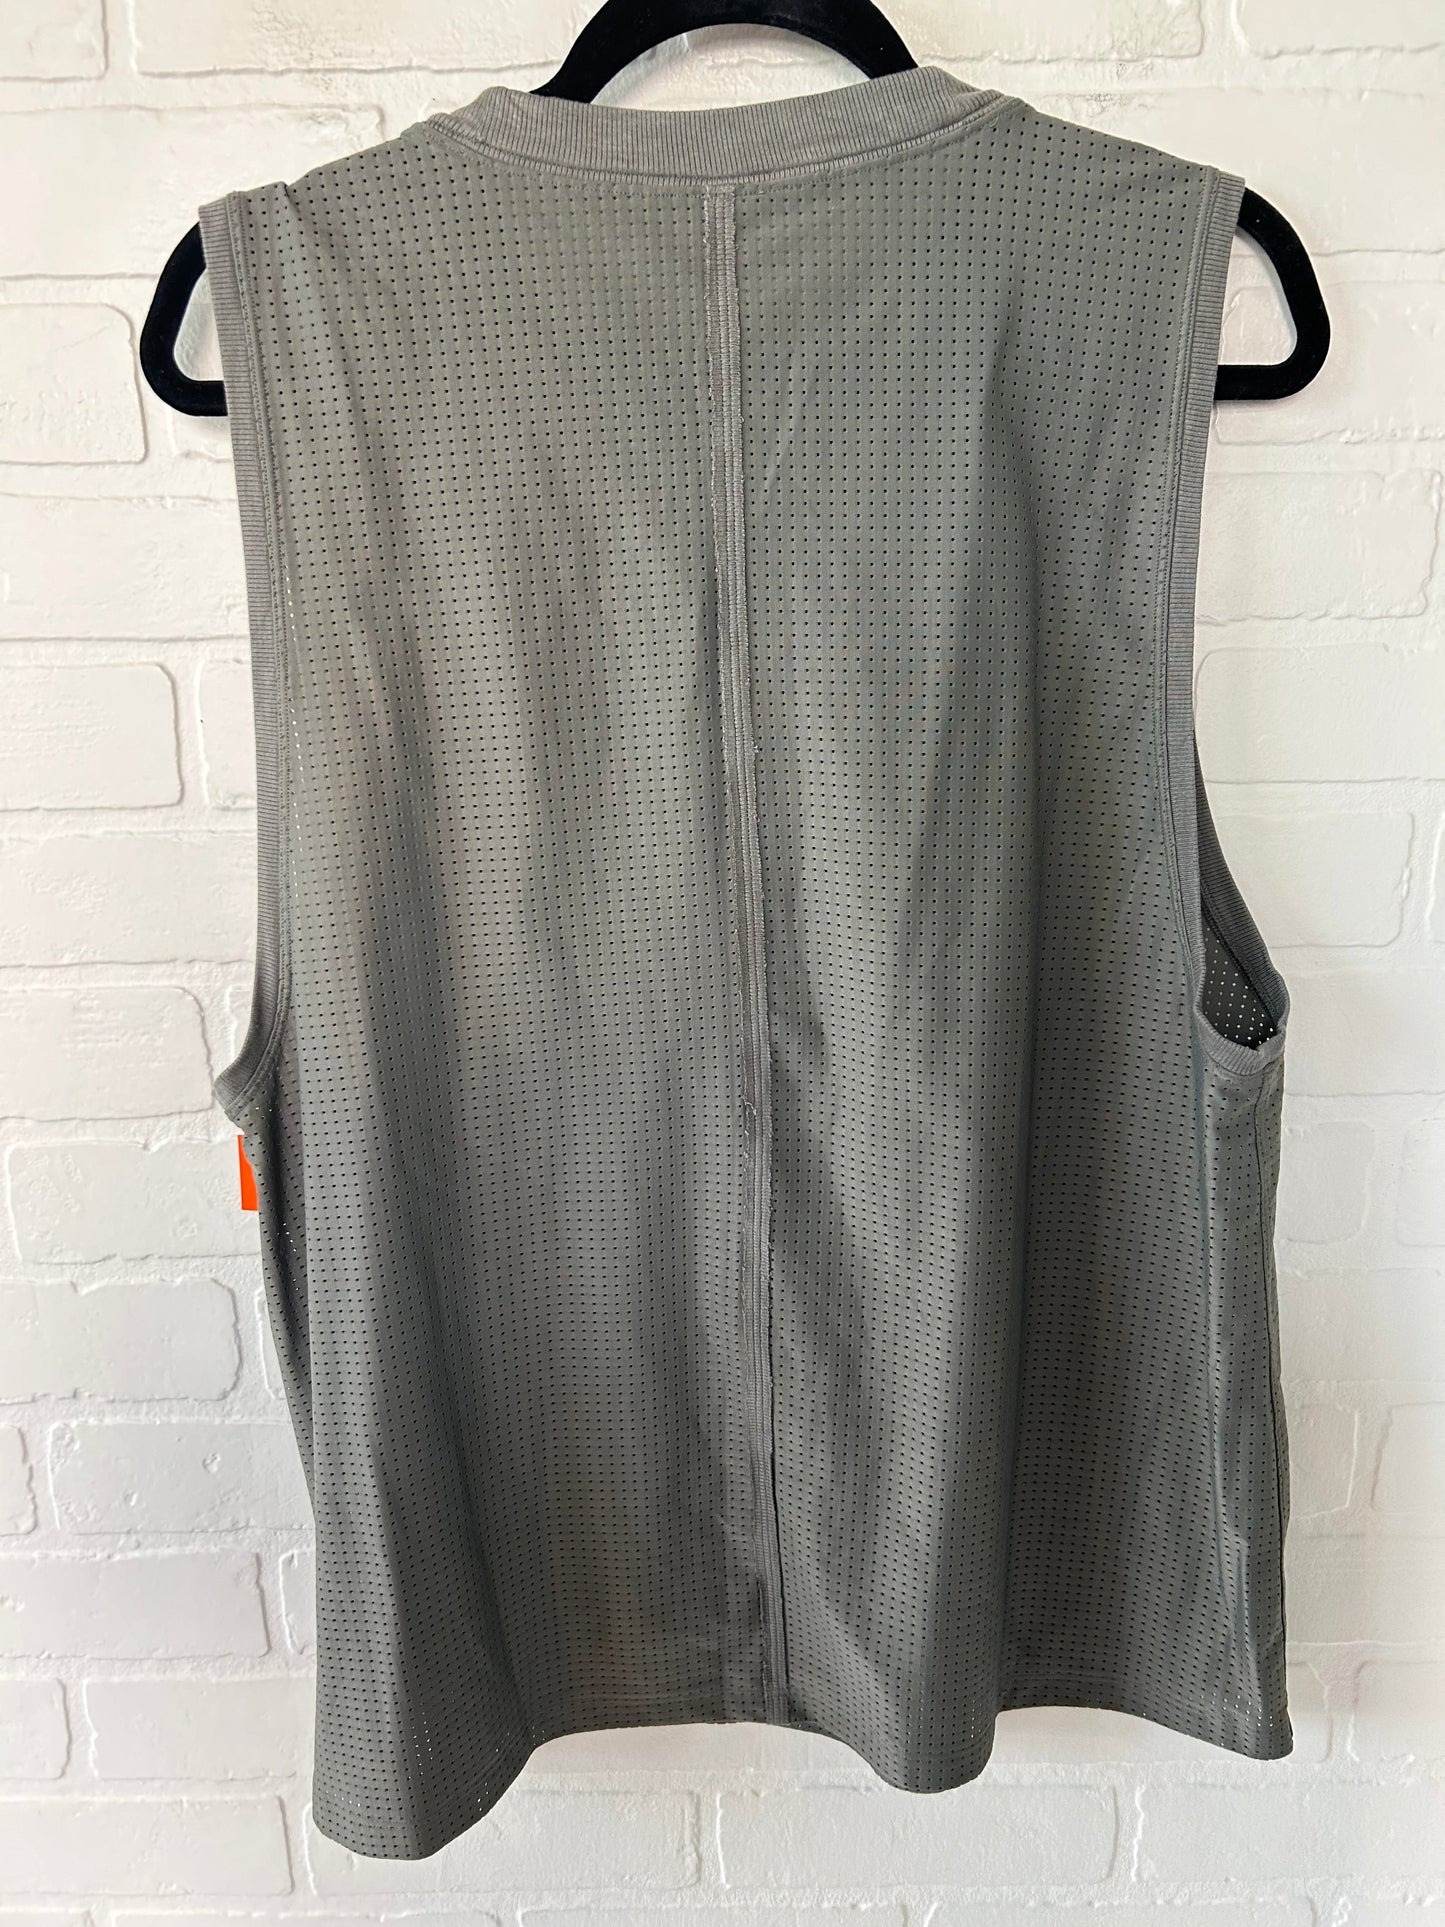 Athletic Tank Top By Lululemon  Size: Xl